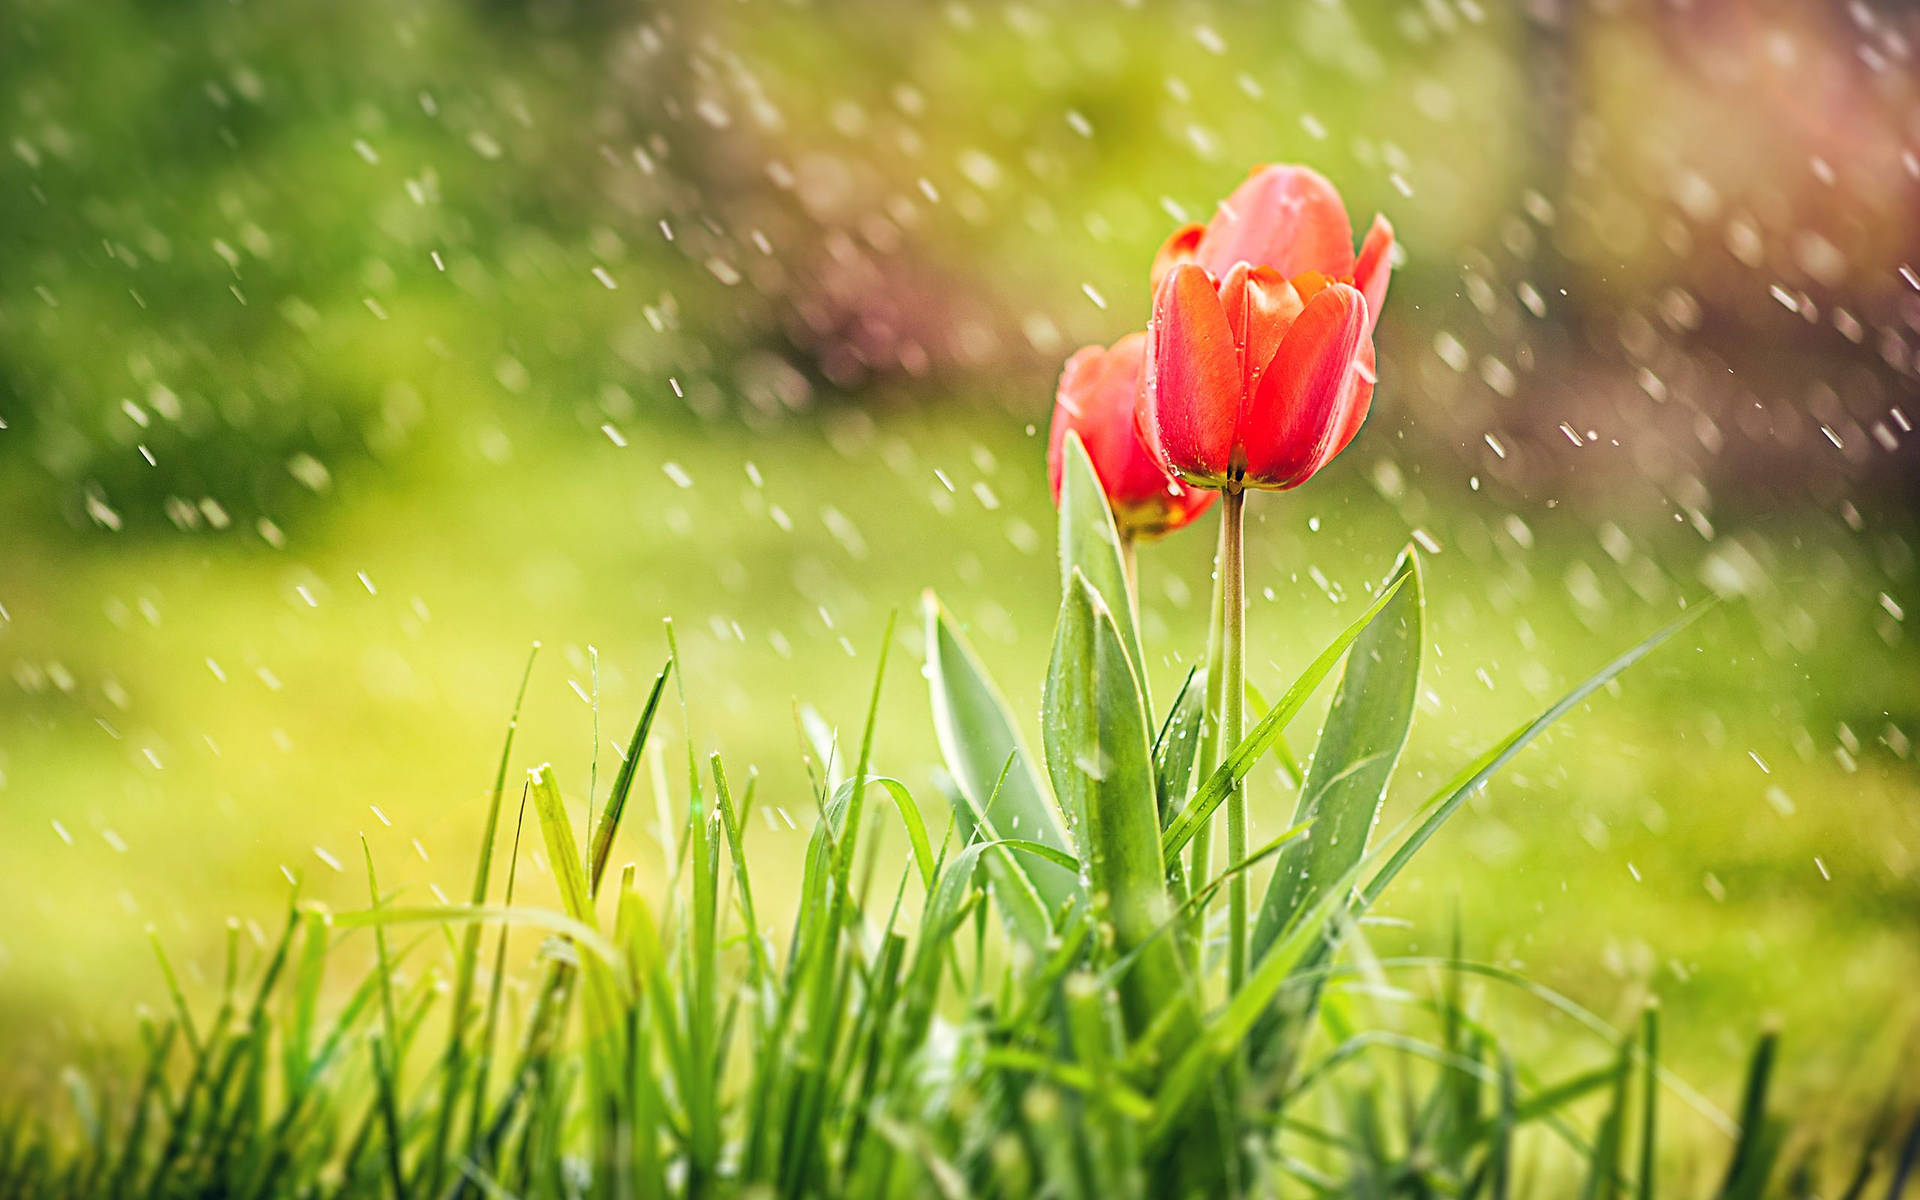 wallpapers of rainy nature